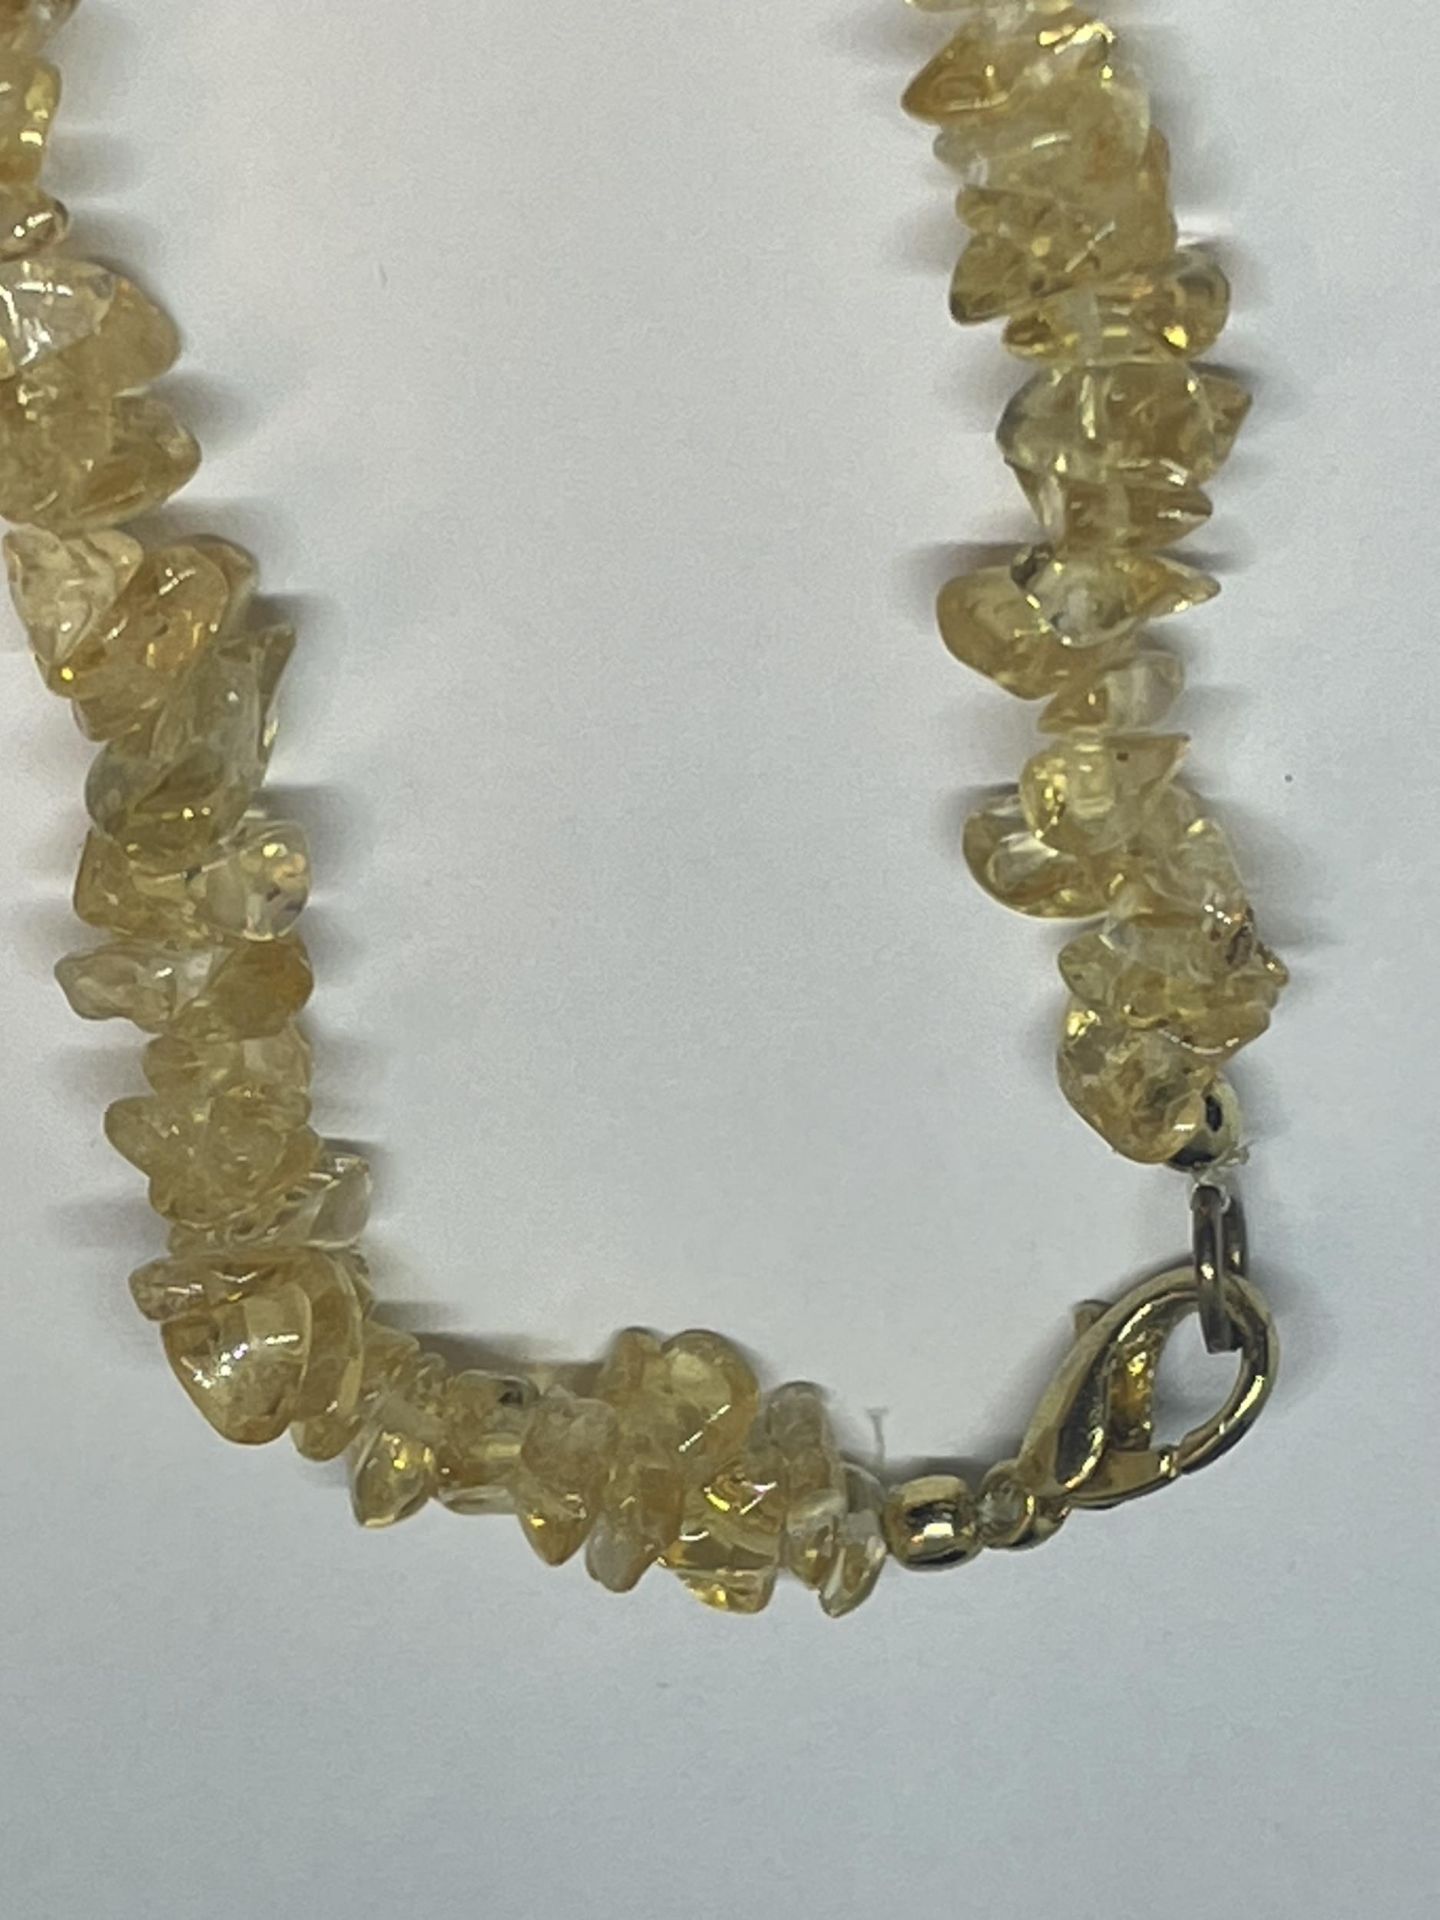 A CITRINE NECKLACE IN A PRESENTATION BOX - Image 3 of 4